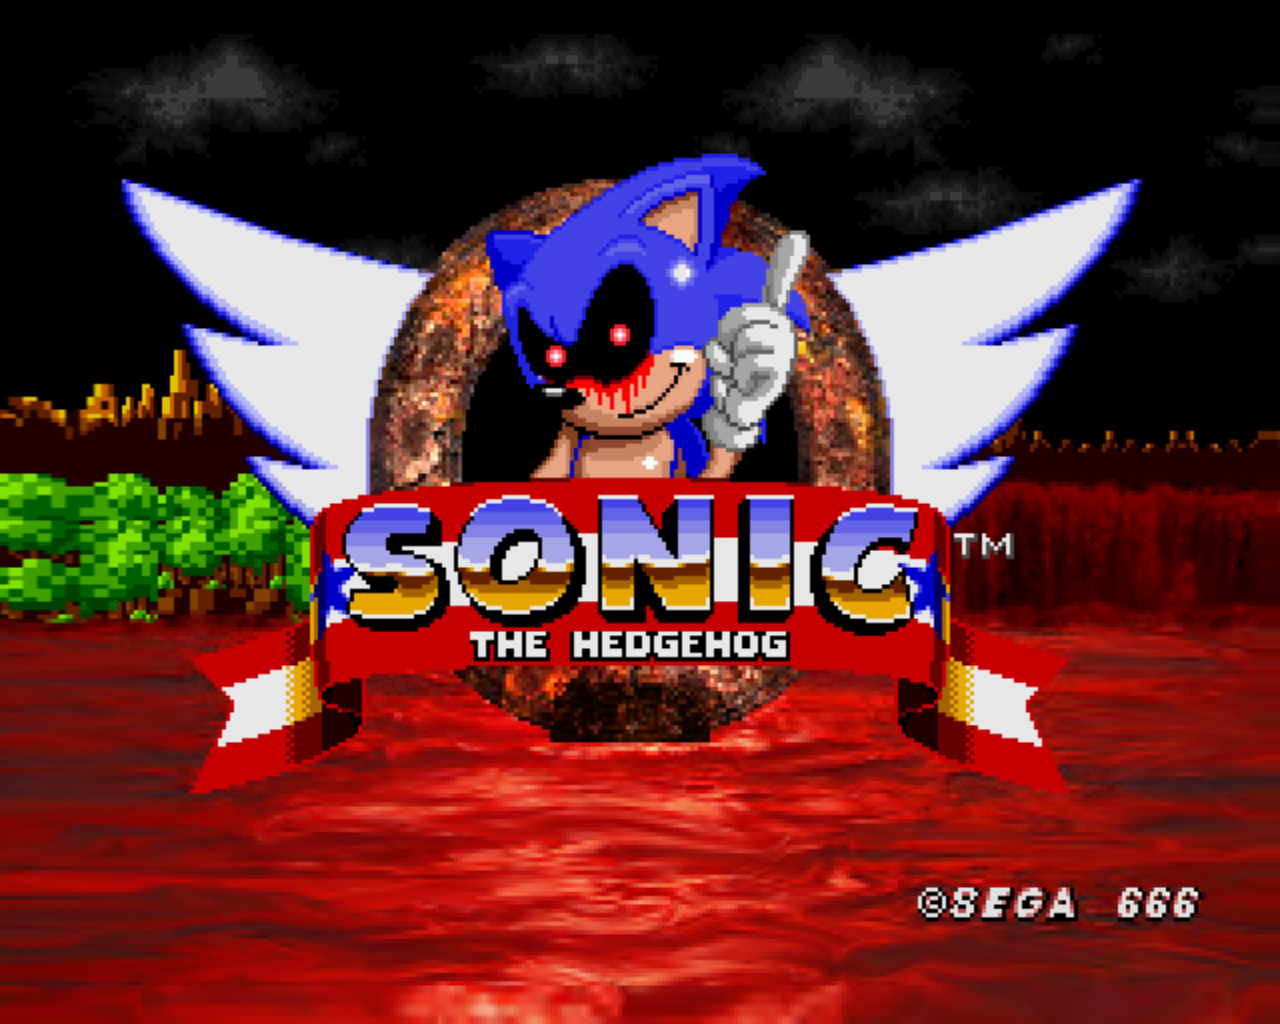 THE OFFICIAL SONIC.EXE MULTIPLAYER GAME!! SONIC.EXE 2D THE